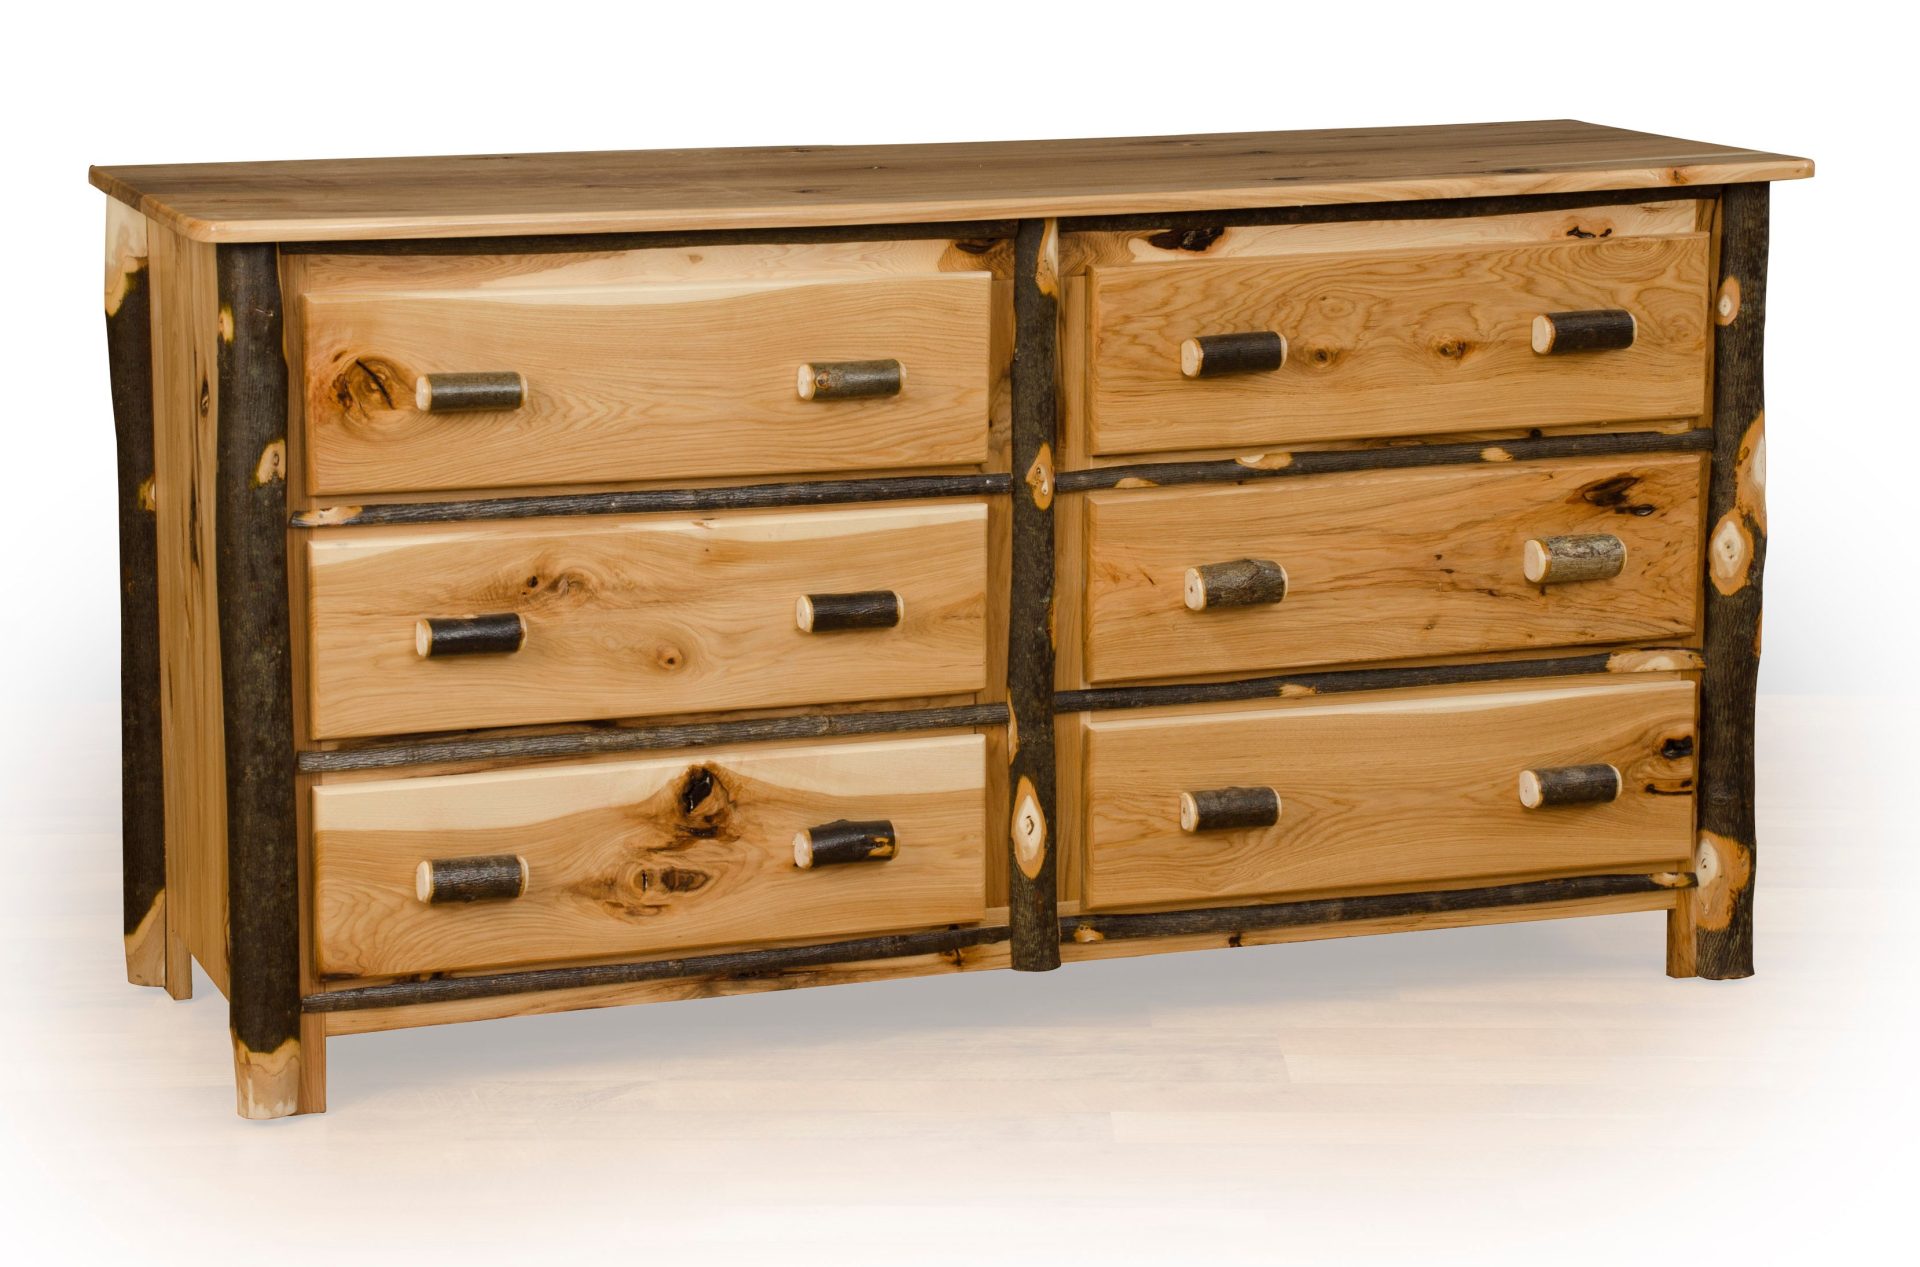 Rustic Hickory Dresser – Available in 6 or 7 Drawer